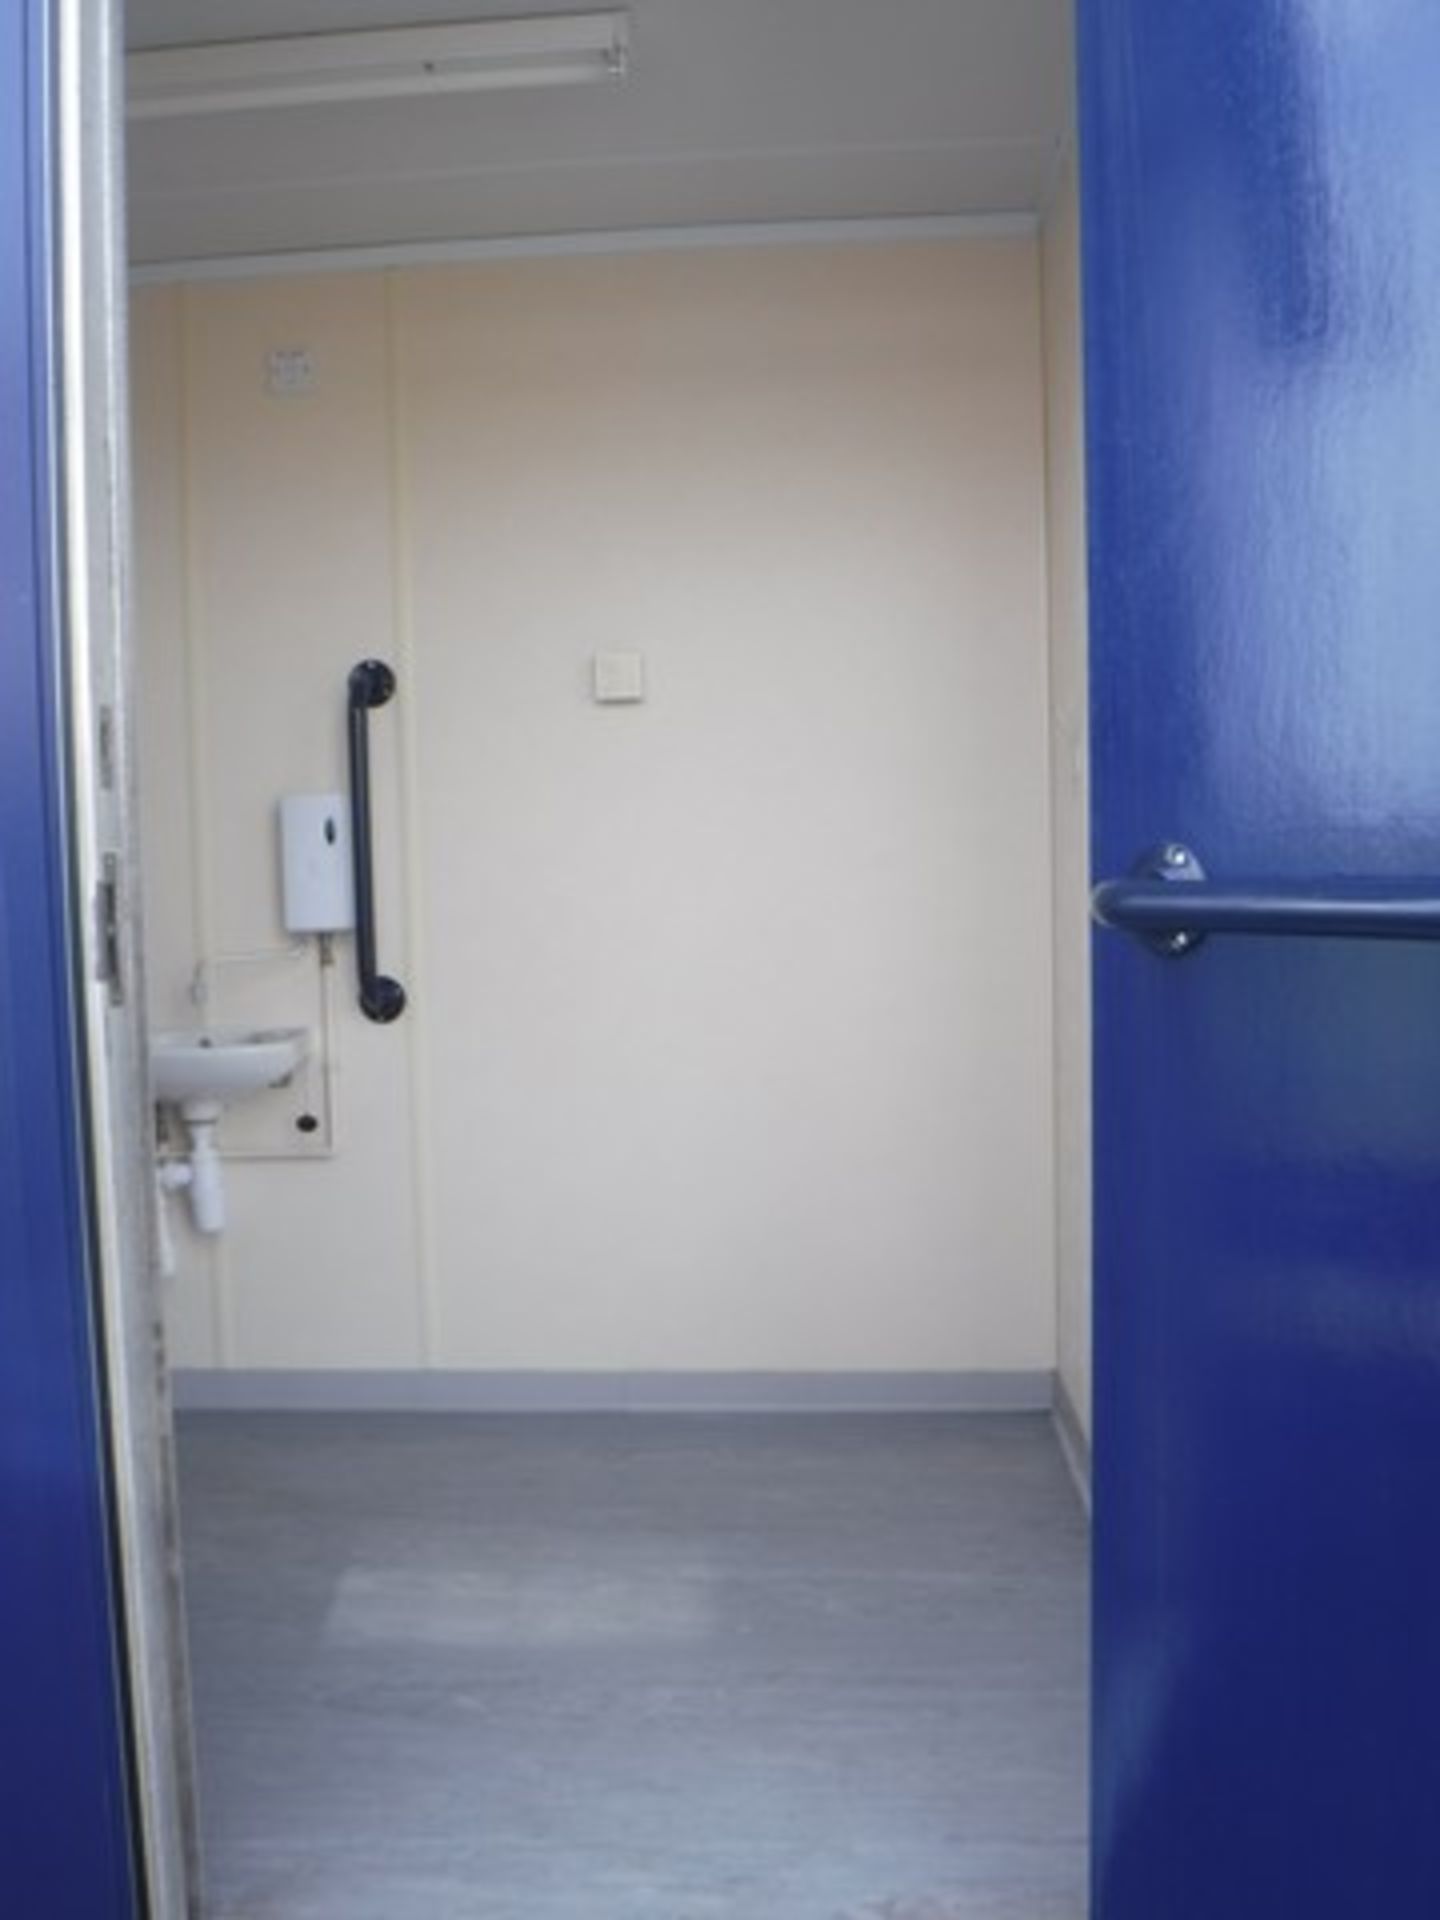 40 X 10 TOILET BLOCK, C/W 10 CUBICALS, 10 URINALS, 9 SINKS, WATER HEATERS TEMP CONTROLLED ANTI-FREEZ - Image 4 of 9